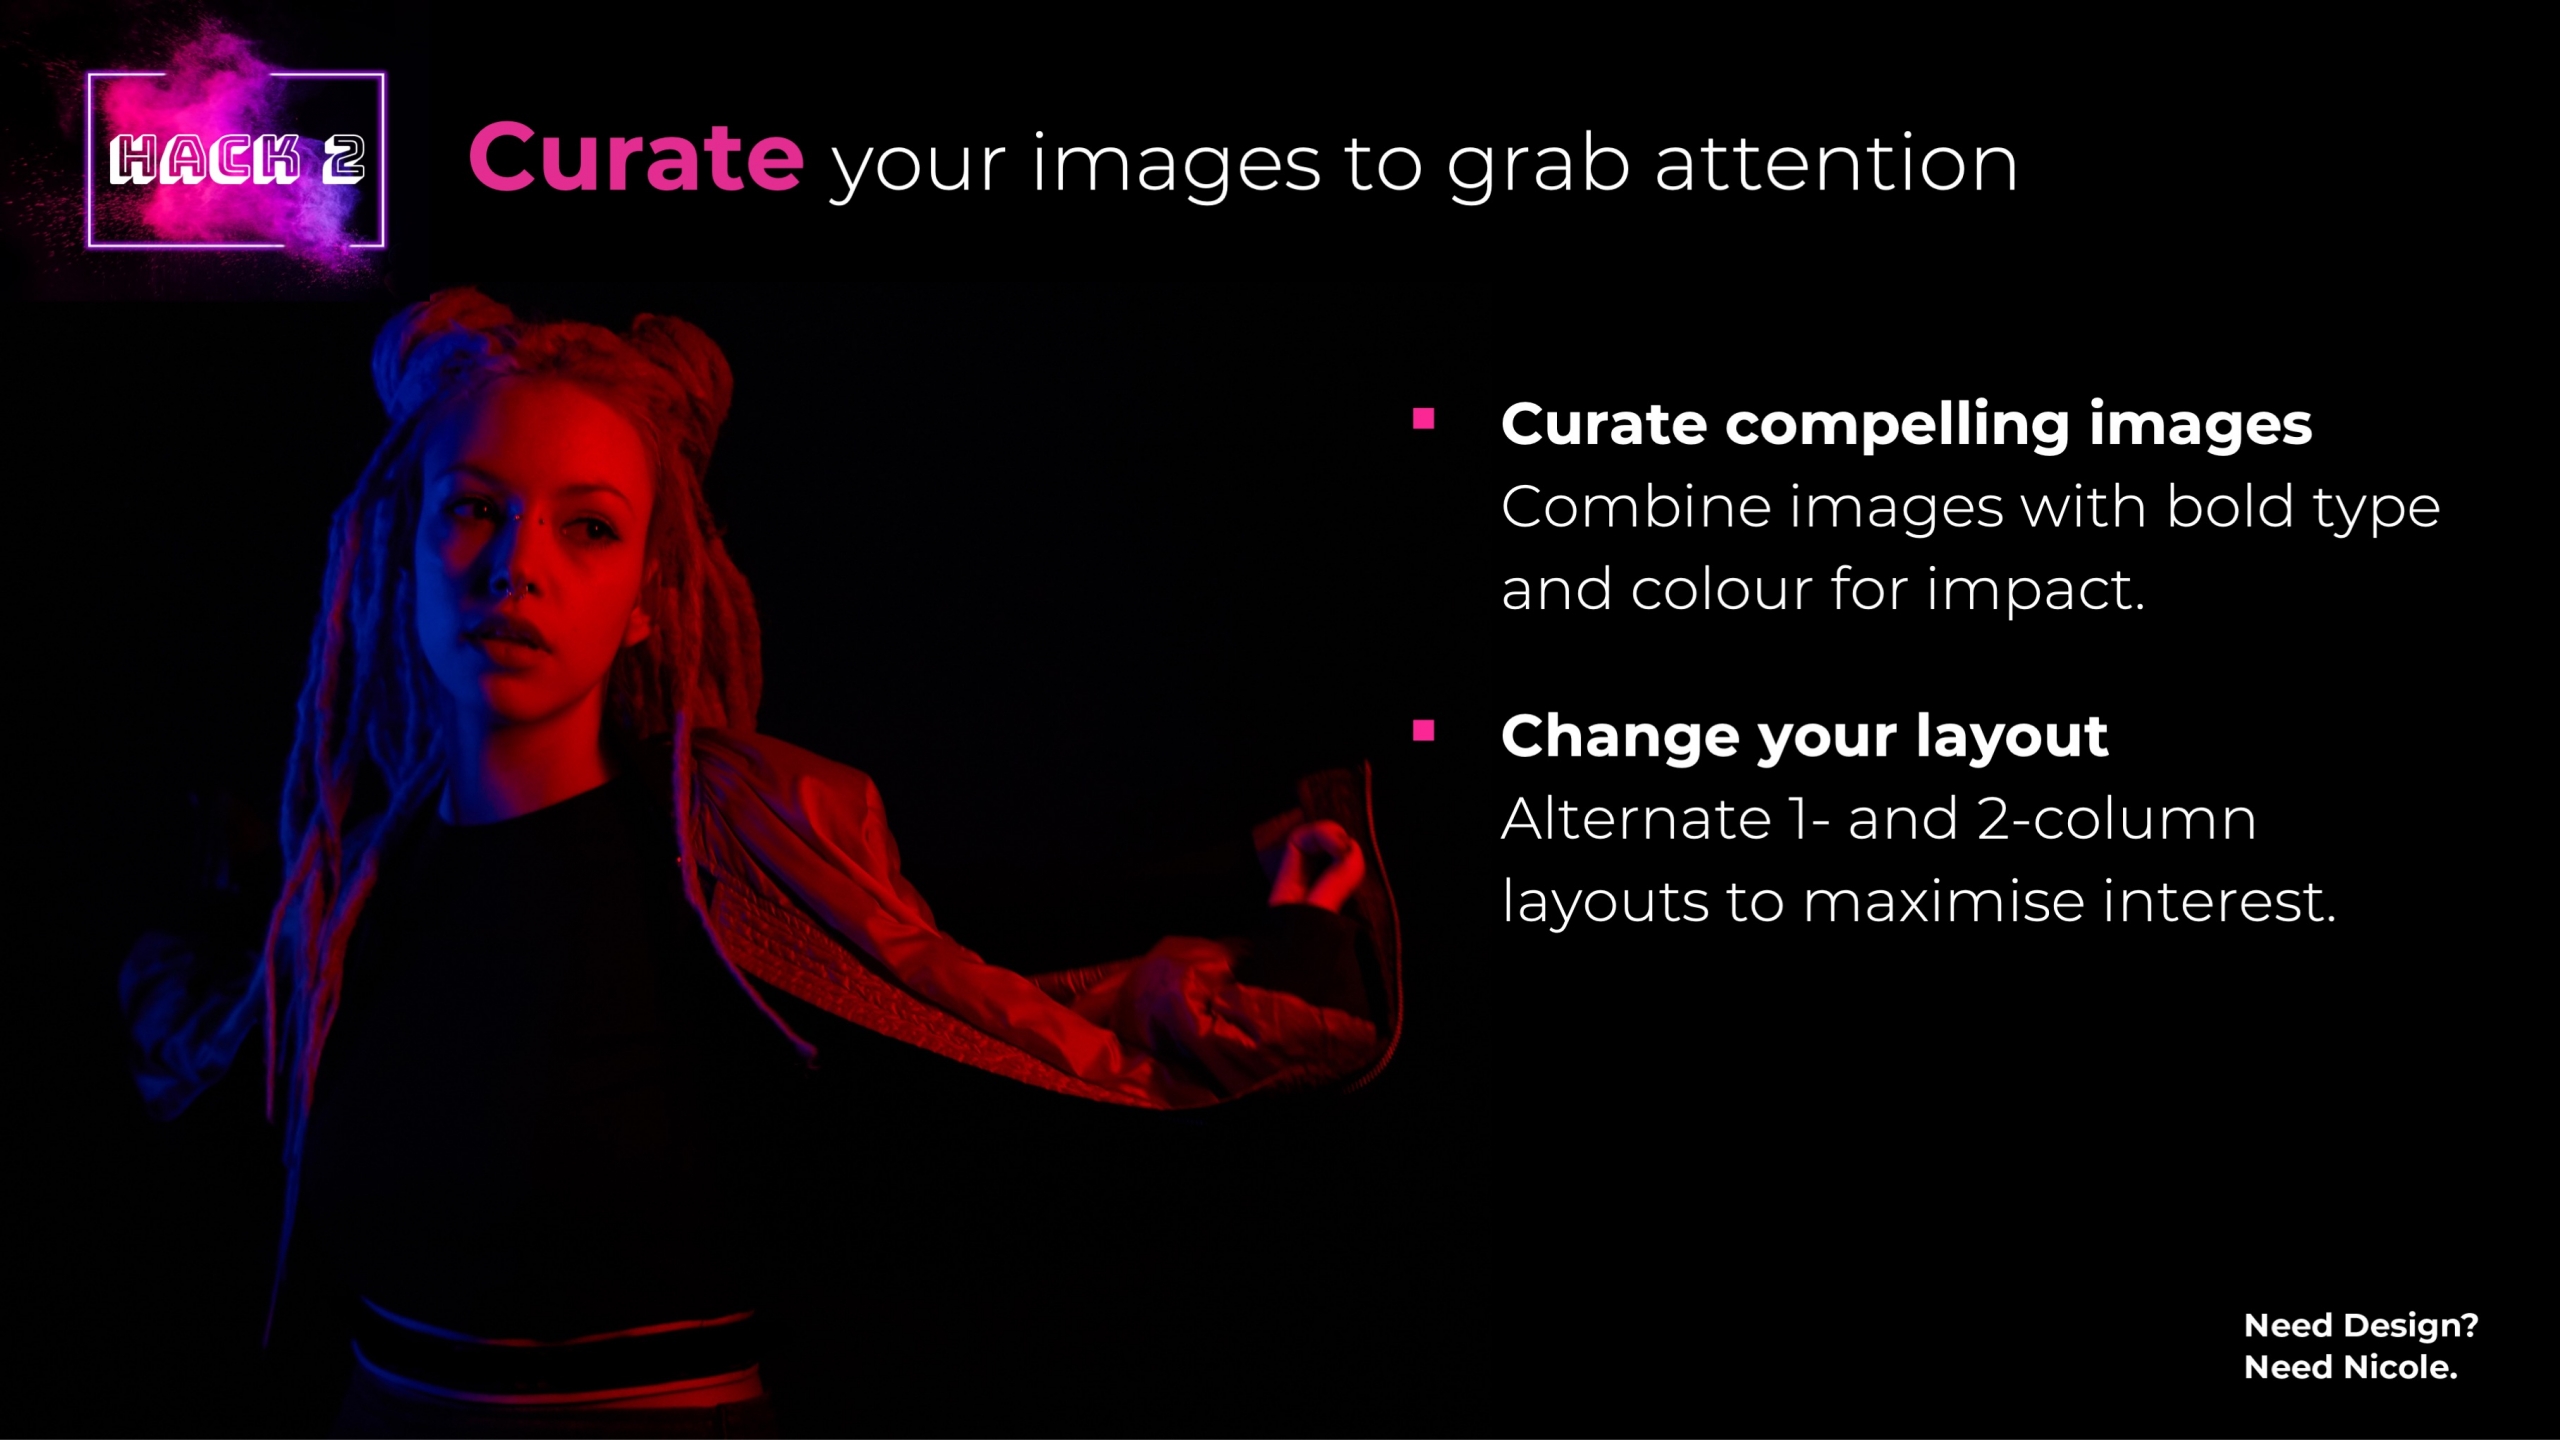 Curate your images to grab attention Curate compelling imagesCombine images with bold type and colour for impact. Change your layoutAlternate 1- and 2-column layouts to maximise interest.